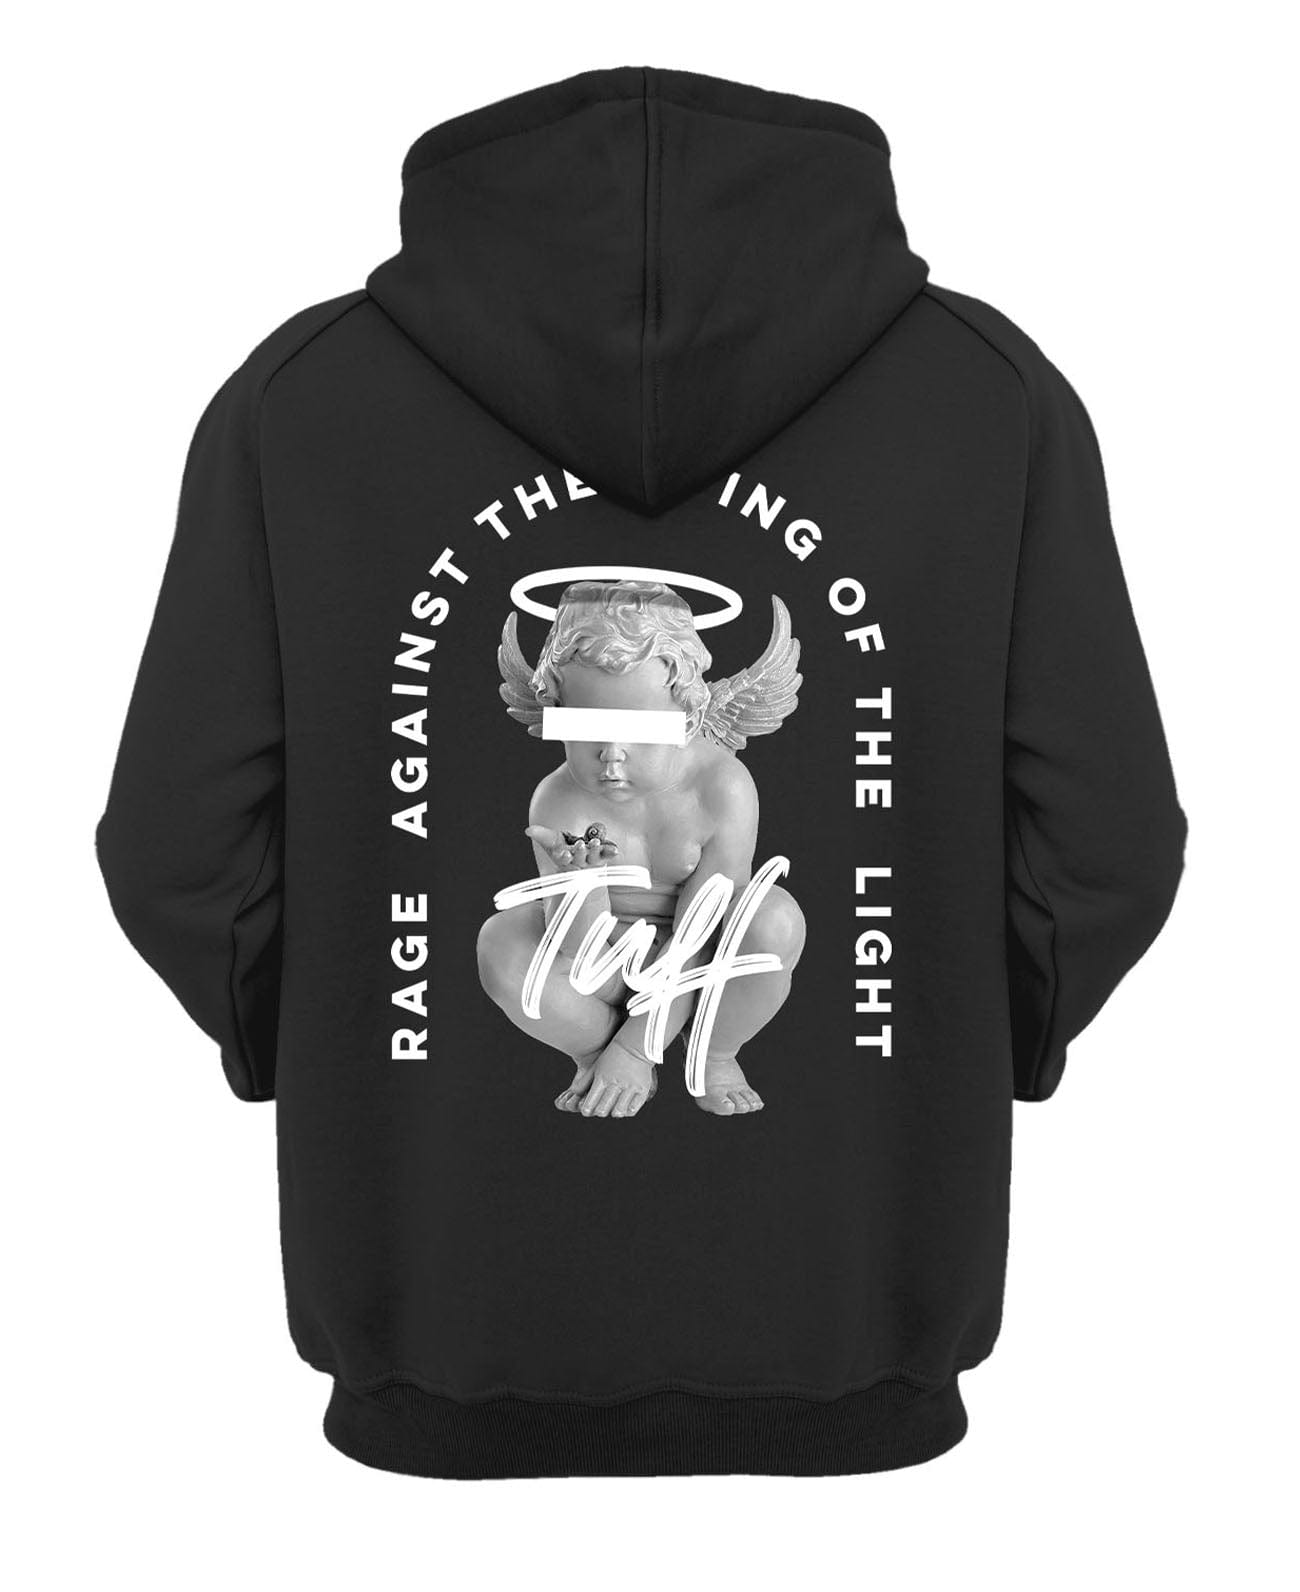 Rage Against the Dying of the Light Hooded Sweatshirt XS / Black TuffWraps.com